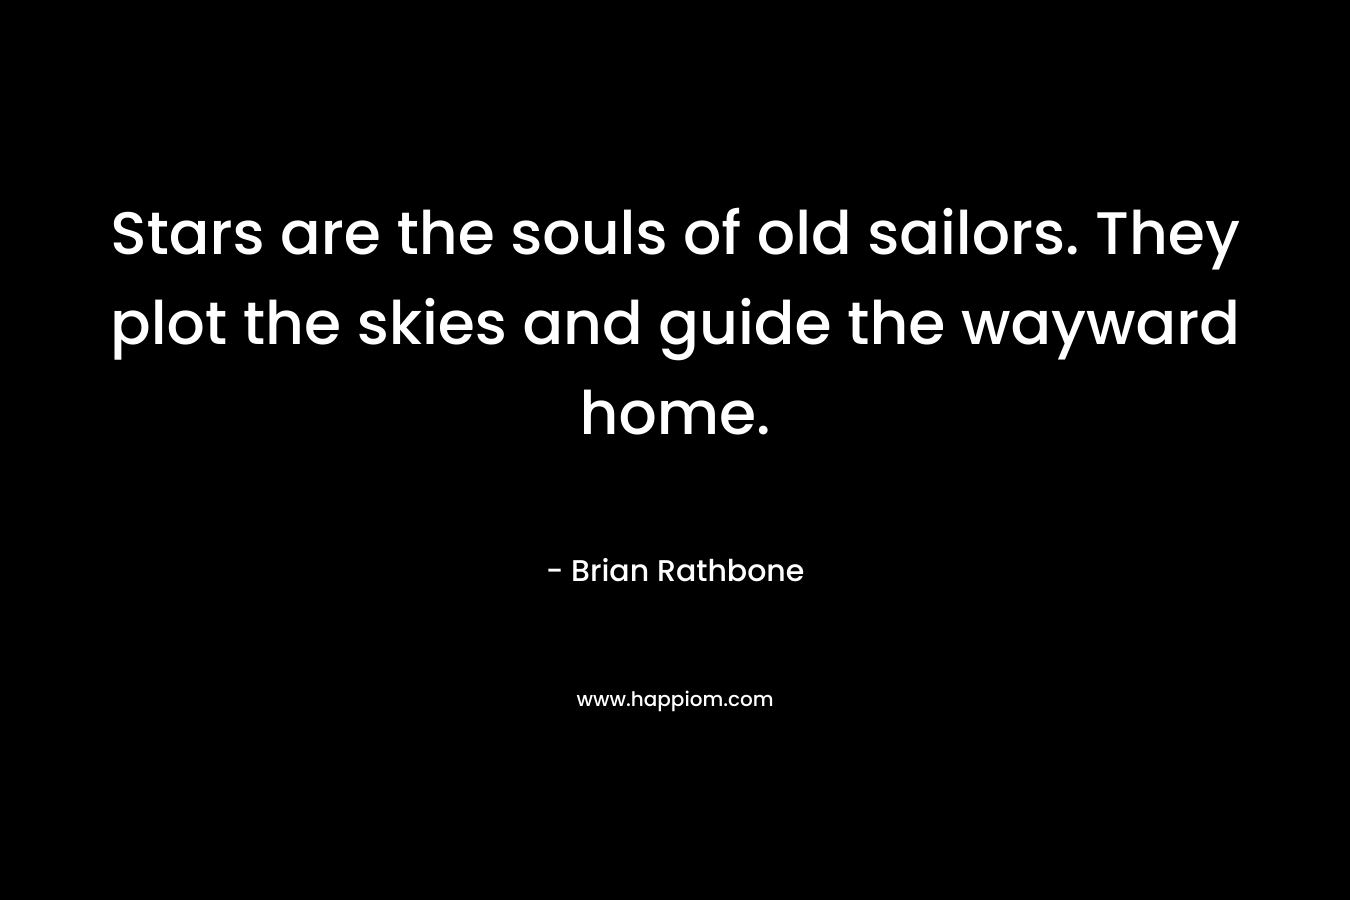 Stars are the souls of old sailors. They plot the skies and guide the wayward home.